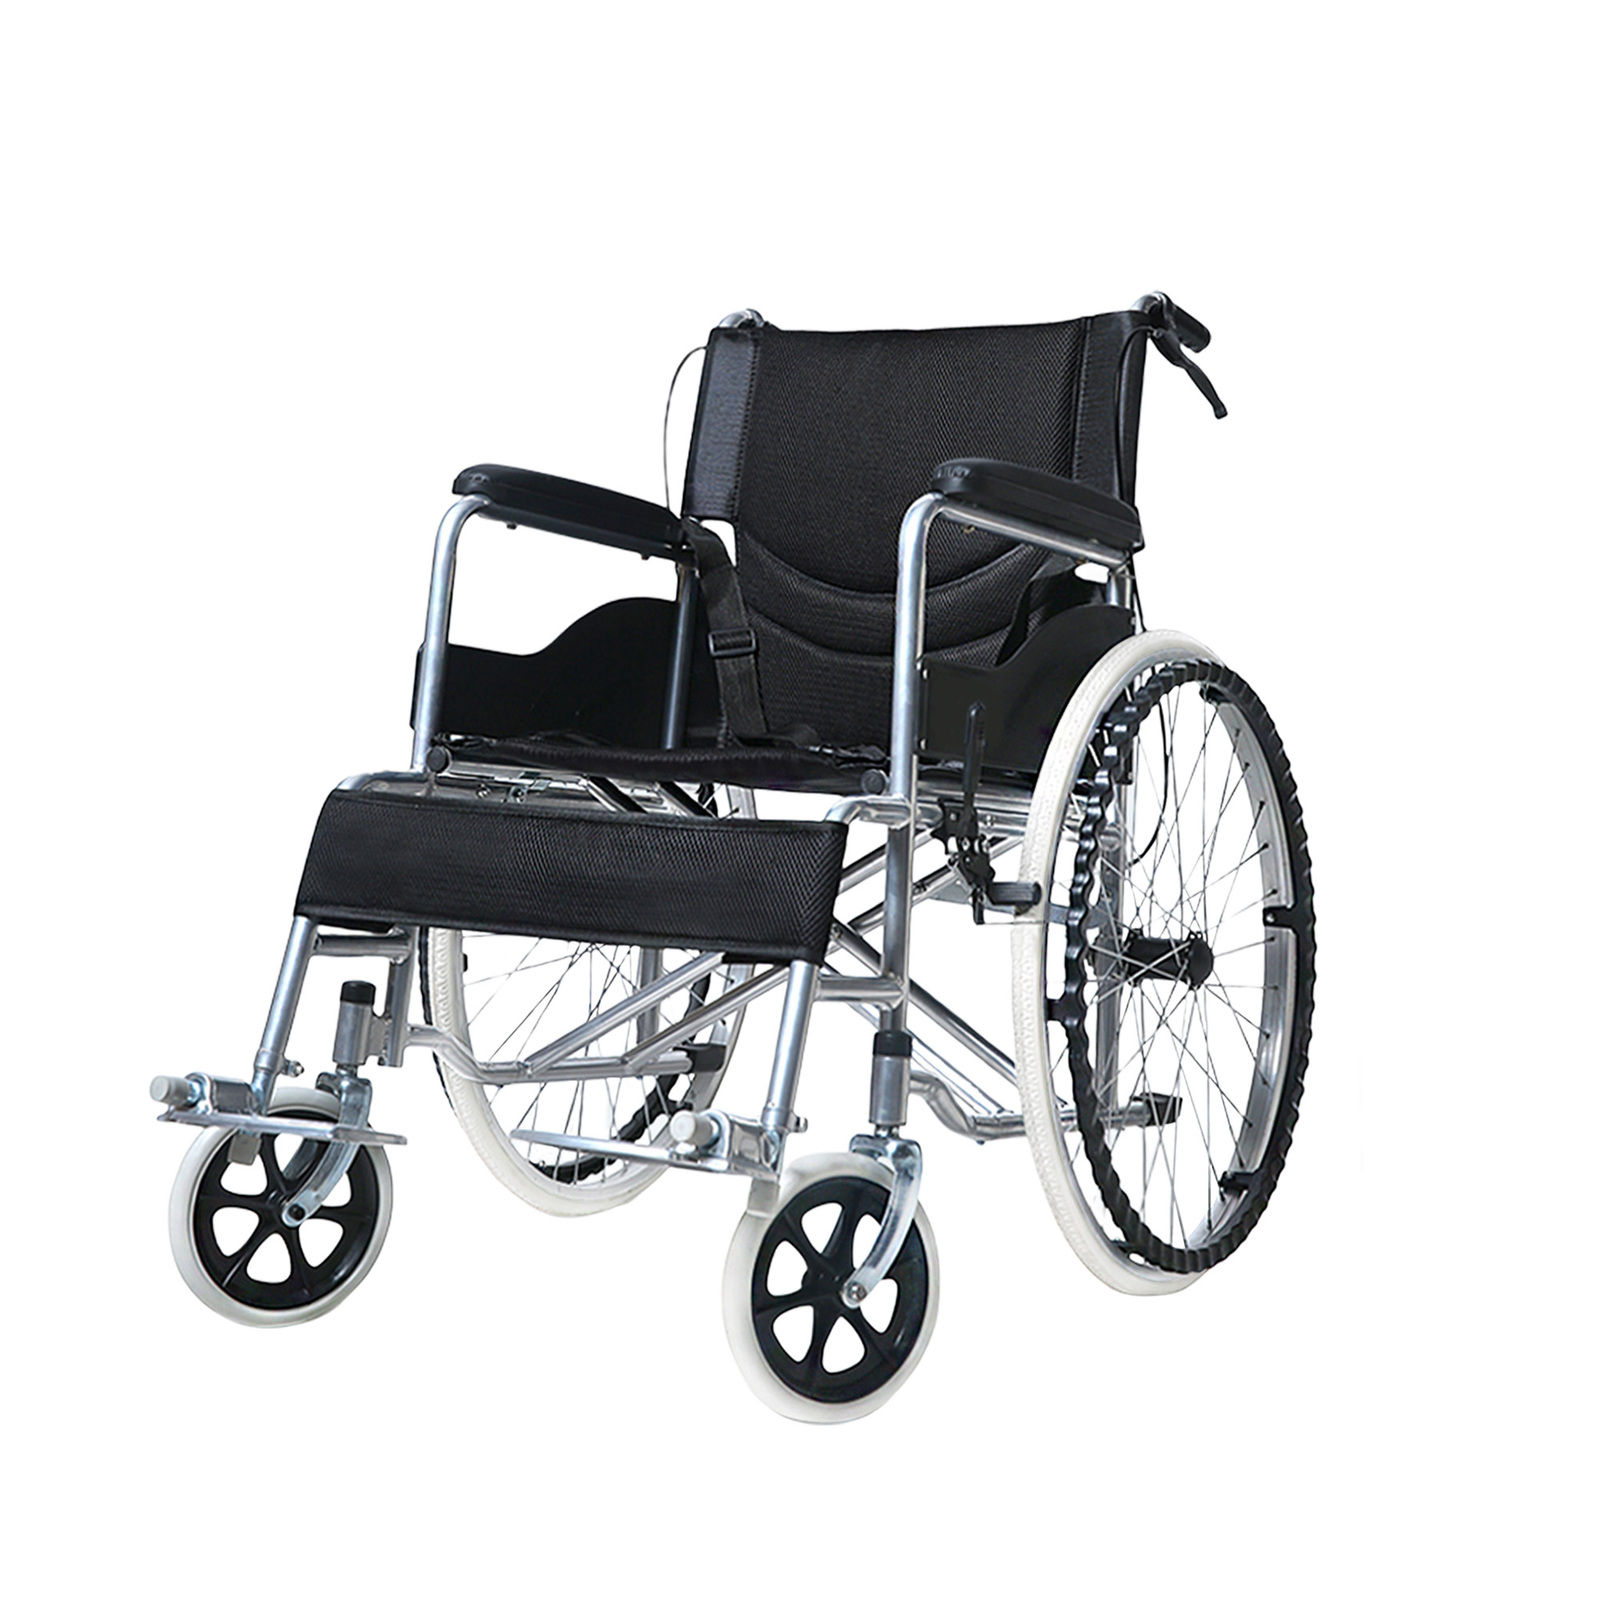 24" Foldable Wheelchair Manual Folding Wheel Chair Portable and Lightweight